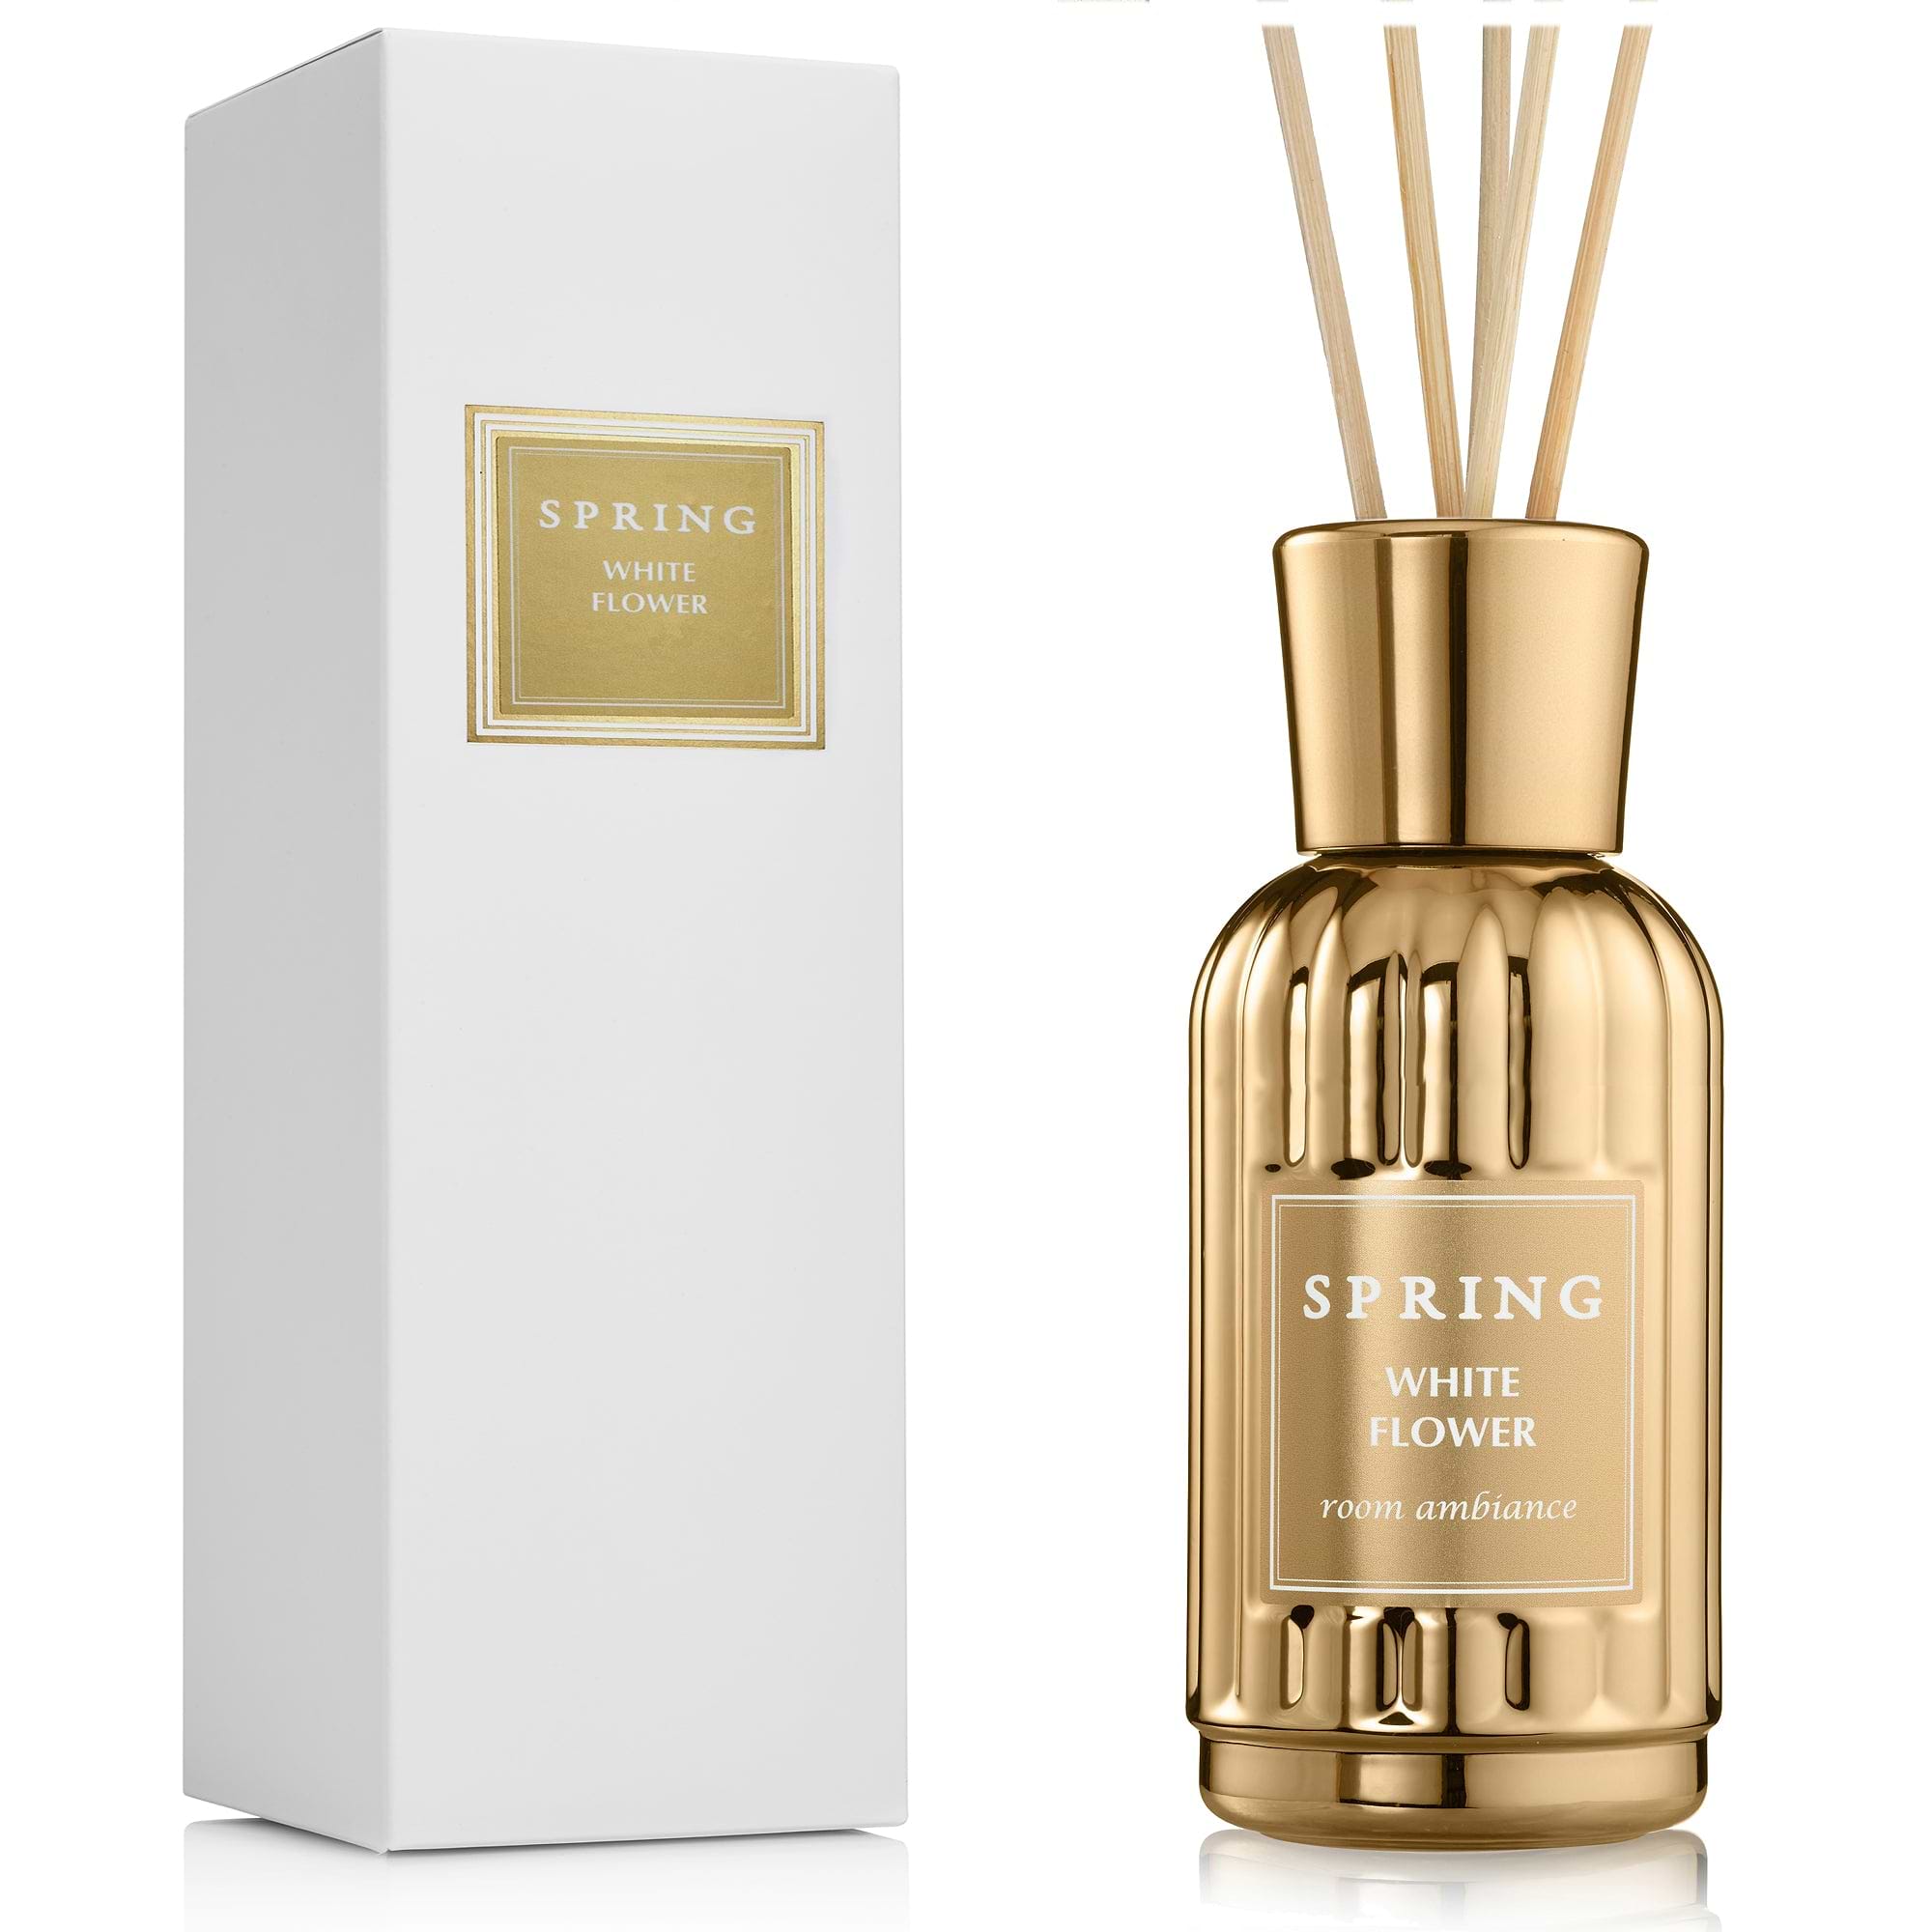 SPRING Fragrance Reed Diffuser Set | 6.1 oz (180ml) | Fragrance Made in France | Home Décor | Scented Aromatic Oil | Room Air Freshener White Flower | Alcohol + Ethanol free and VOC Compliant